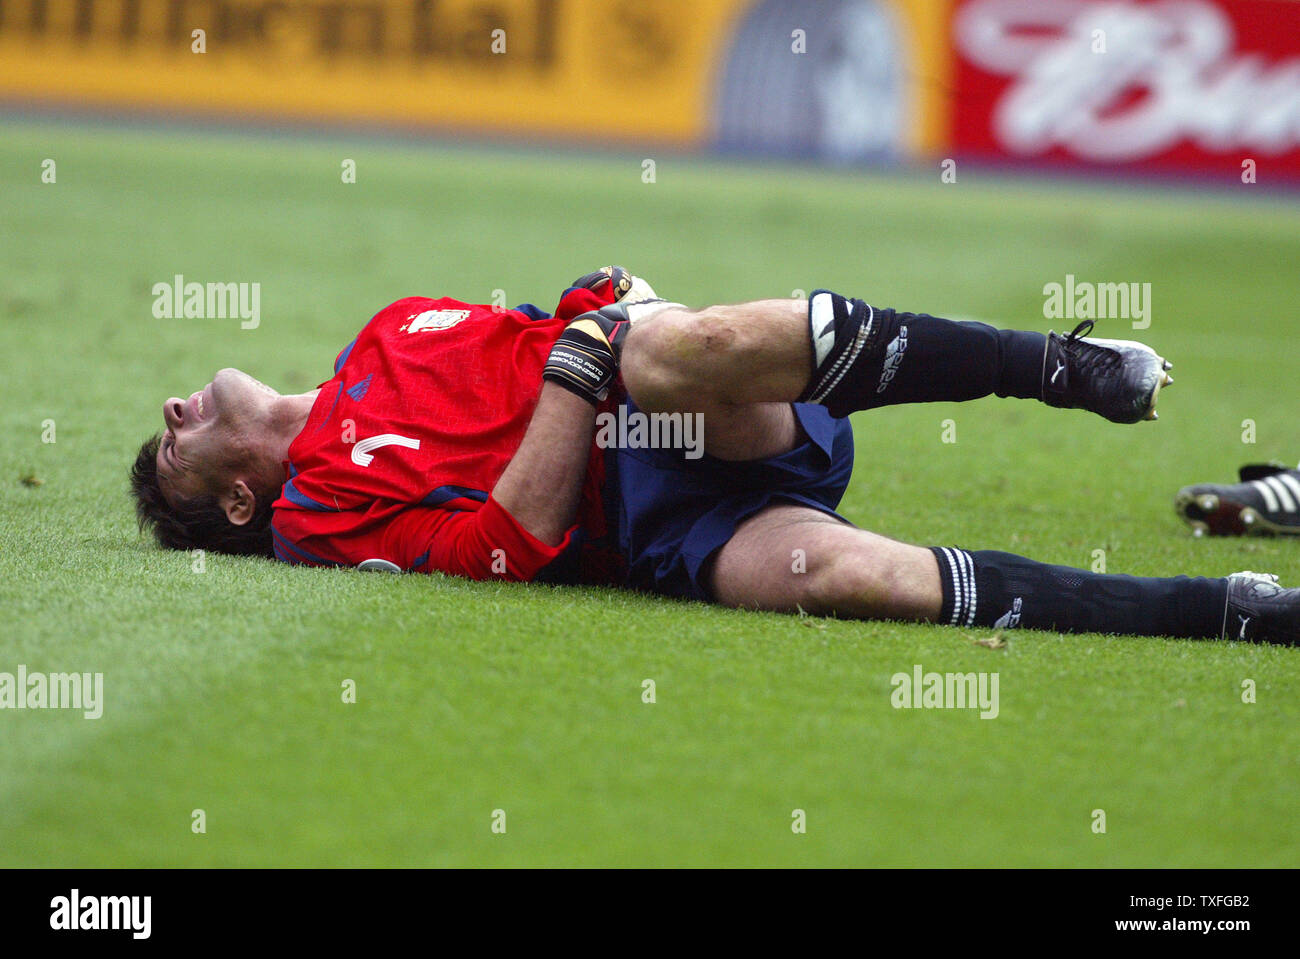 Argentina's goal keeper Roberto Abbondanzieri is hurt and in  pain during World Cup soccer at Olympiastadion on Friday, June 30, 2006 in Berlin, Germany. Germany defeated Argentina 4-2.   (UPI Photo/Arthur Thill) Stock Photo